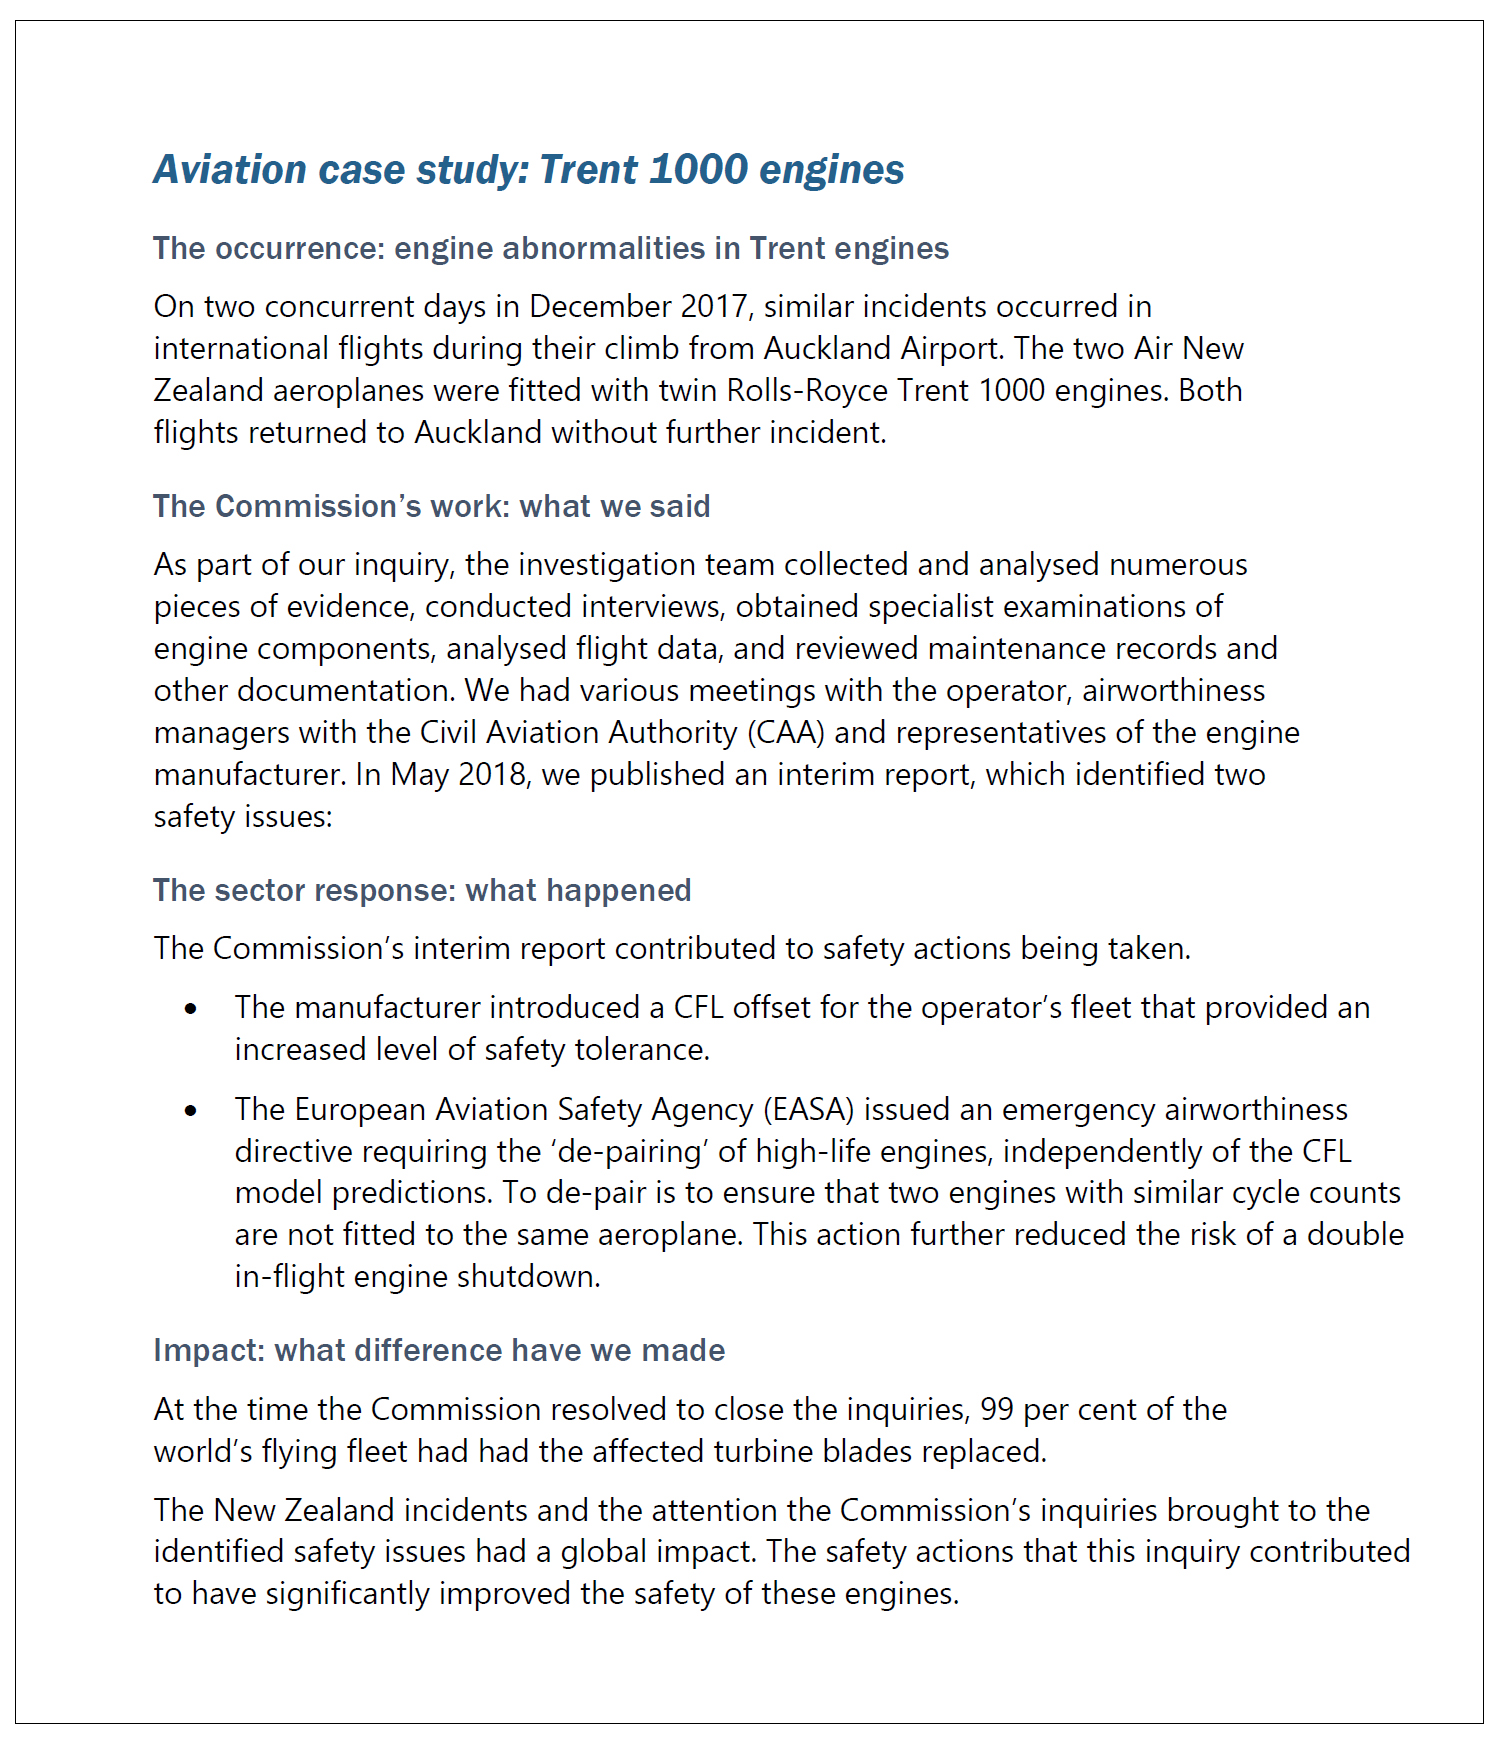 Image from the Transport Accident Investigation Commission’s 2020/21 Annual Report showing a case study that describes an inquiry into engine abnormalities in Trent engines. It described what the Commission did and the difference it made. 